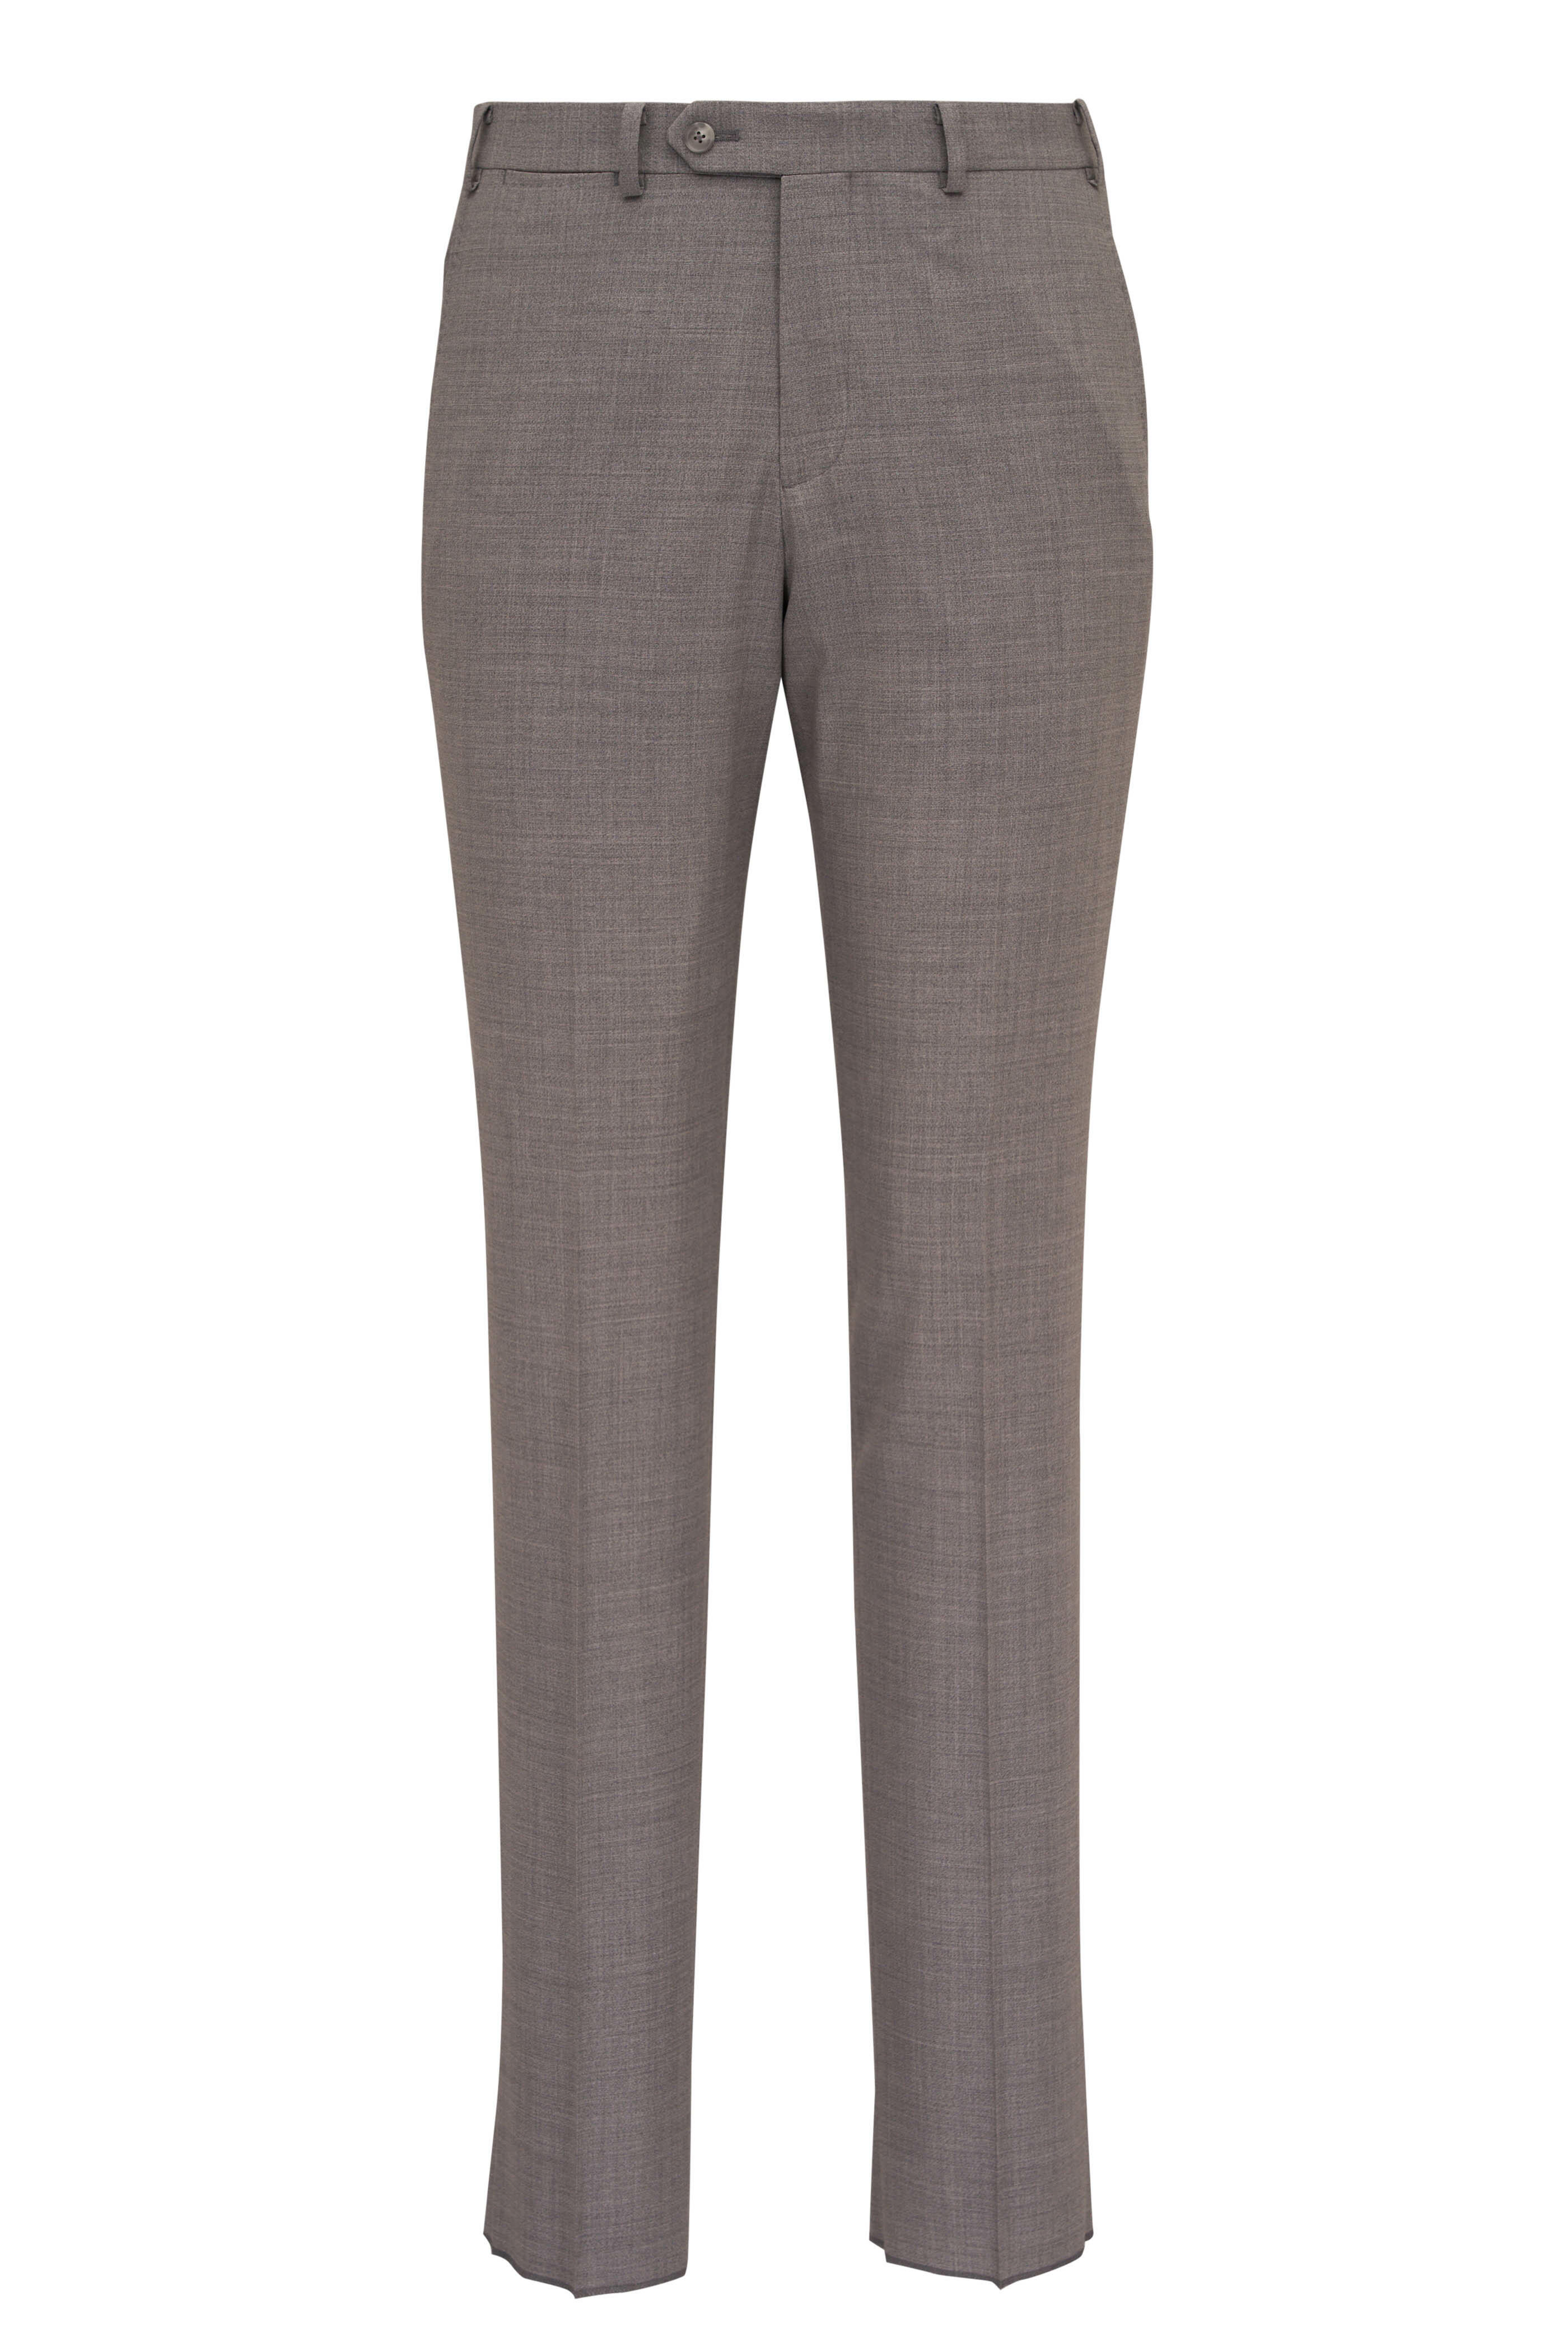 Atelier Munro - Light Gray Stretch Wool Suit | Mitchell Stores